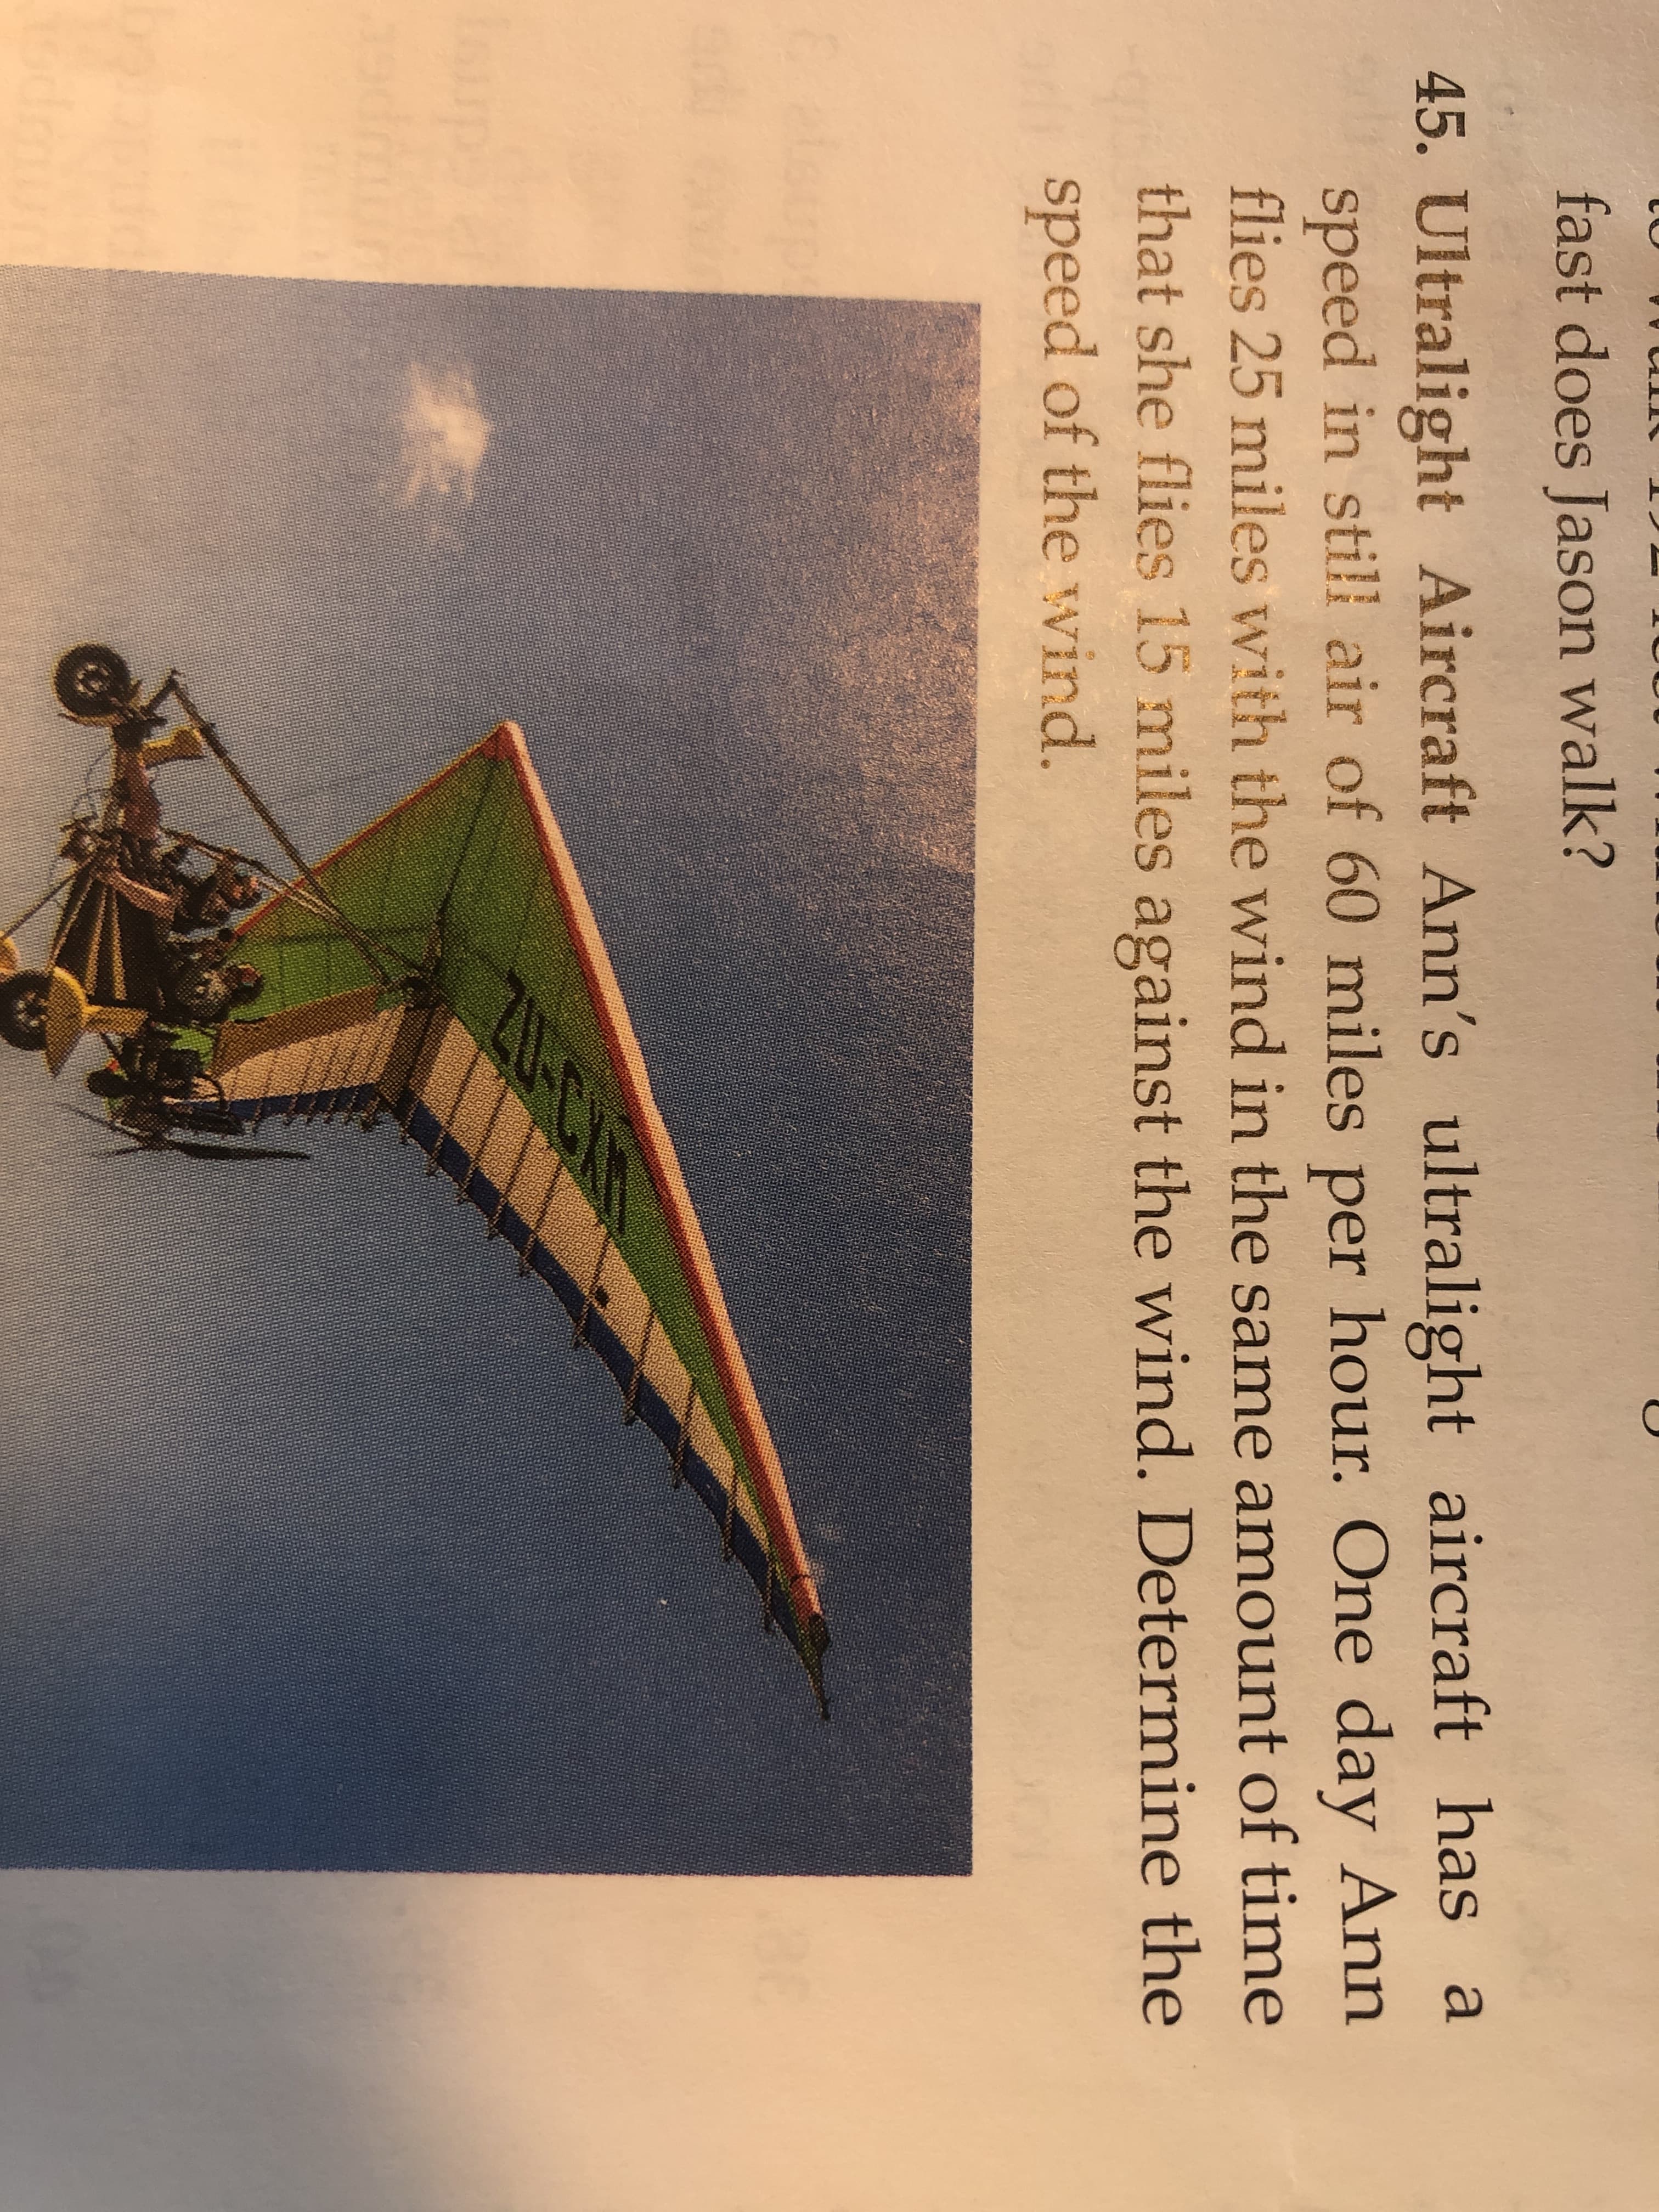 fast does Jason walk?
45. Ultralight Aircraft Ann's ultralight aircraft has a
speed in still air of 60 miles per hour. One day Ann
flies 25 miles with the wind in the same amount of time
that she flies 15 miles against the wind. Determine the
speed of the wvind.
Eelsupt
0-C
